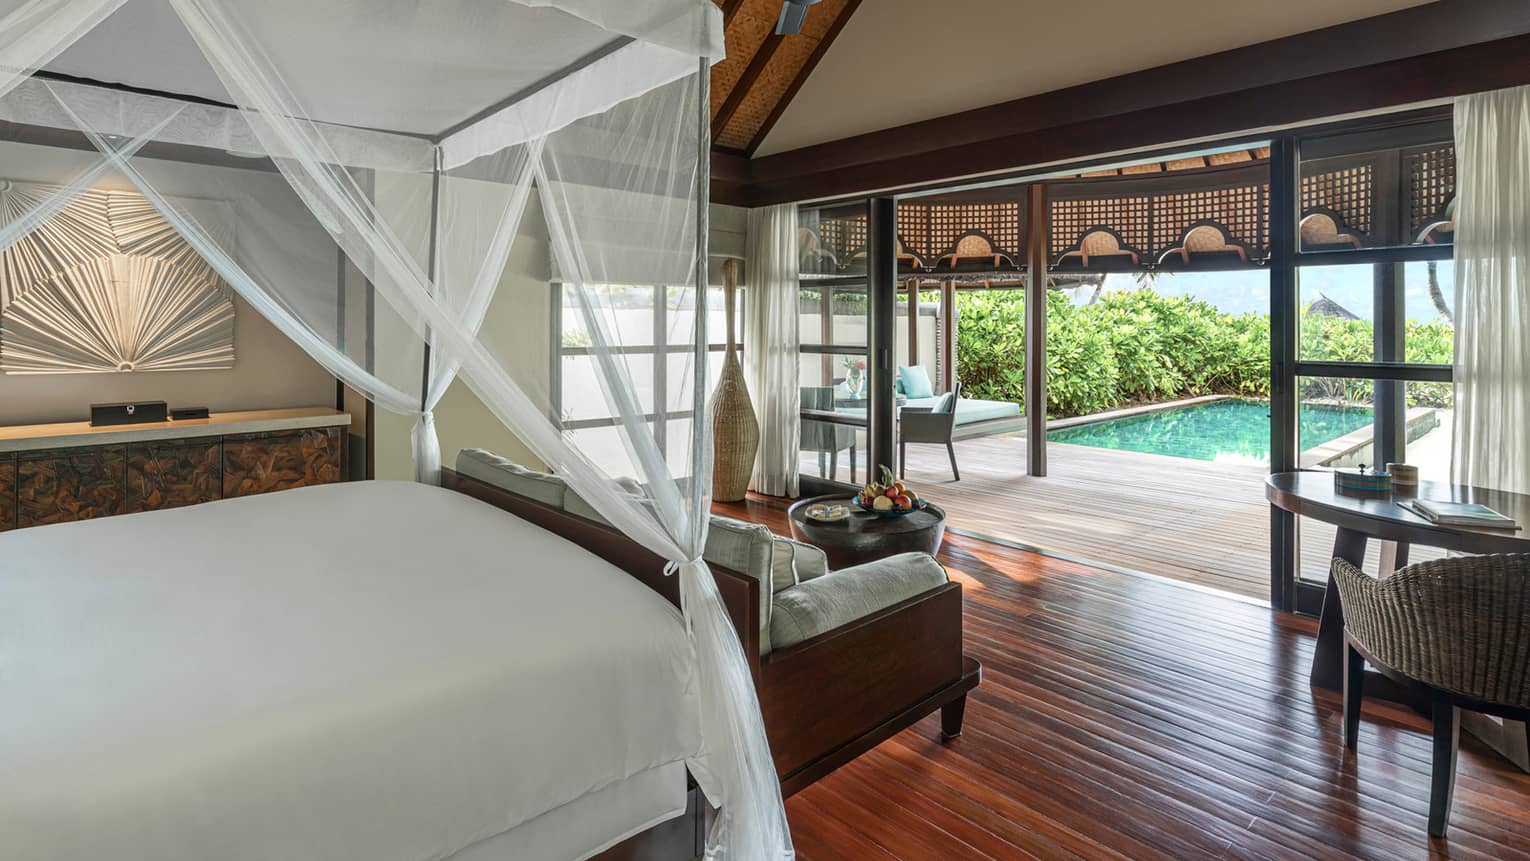 A white canopy hangs from the ceiling, covering a dark wood bed that overlooks a private pool surrounded by lush vegetation in the Sunset Beach Bungalow  